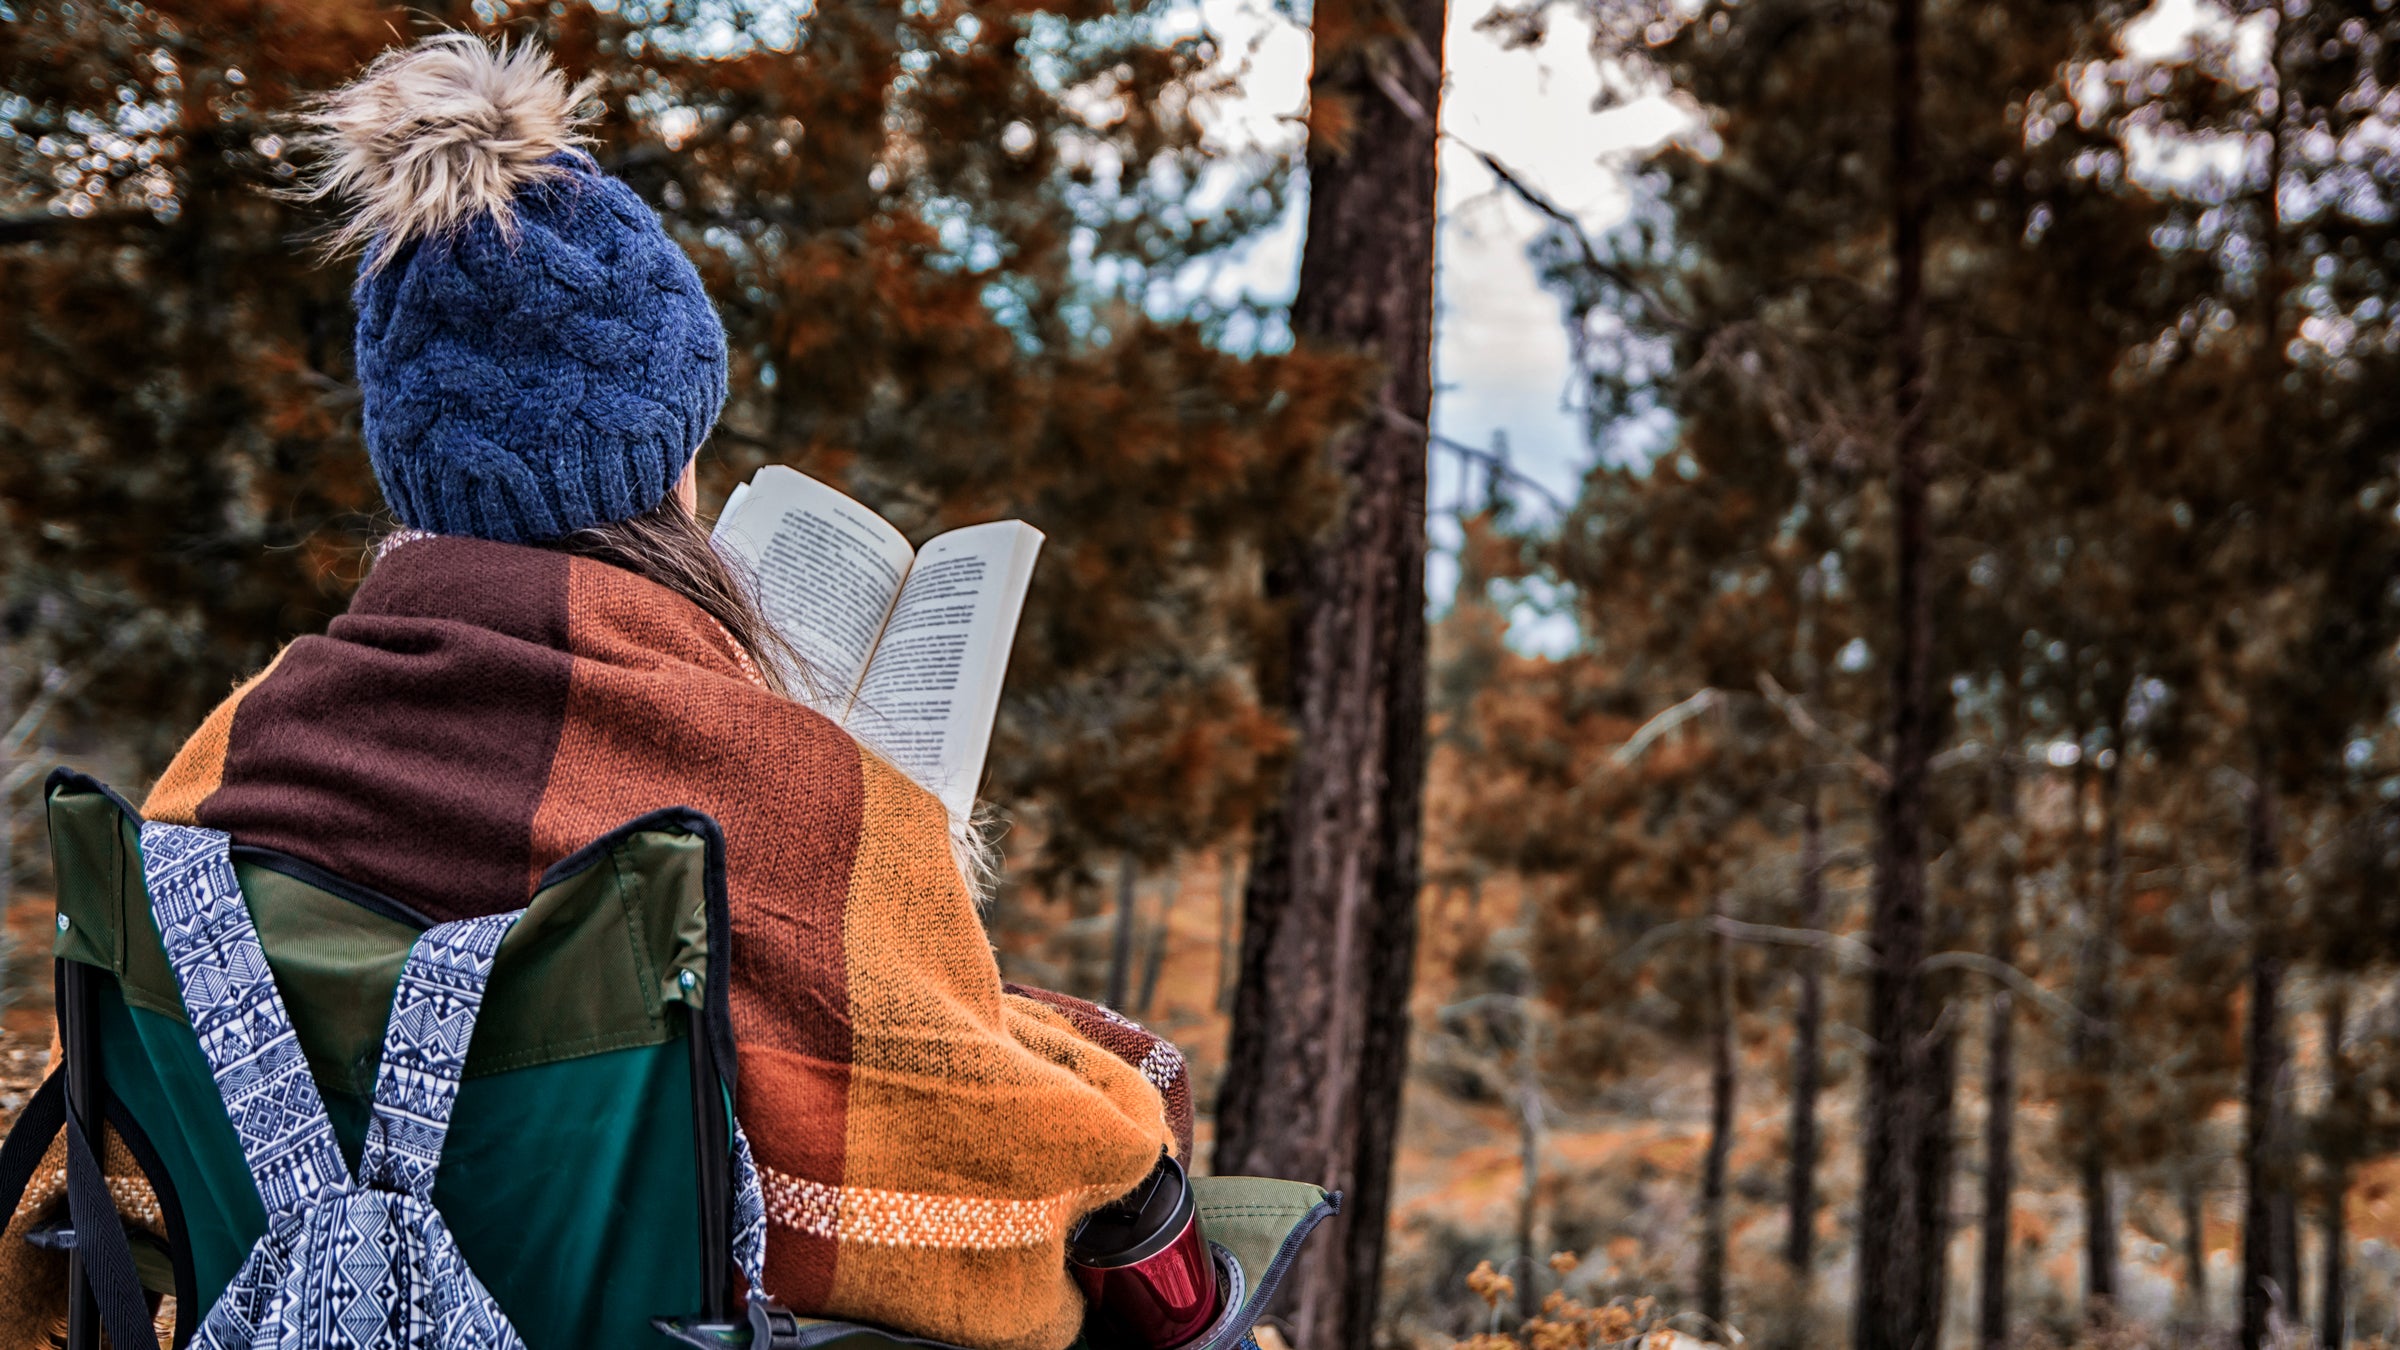 Our Favorite Outdoor Adventure Books for Every State